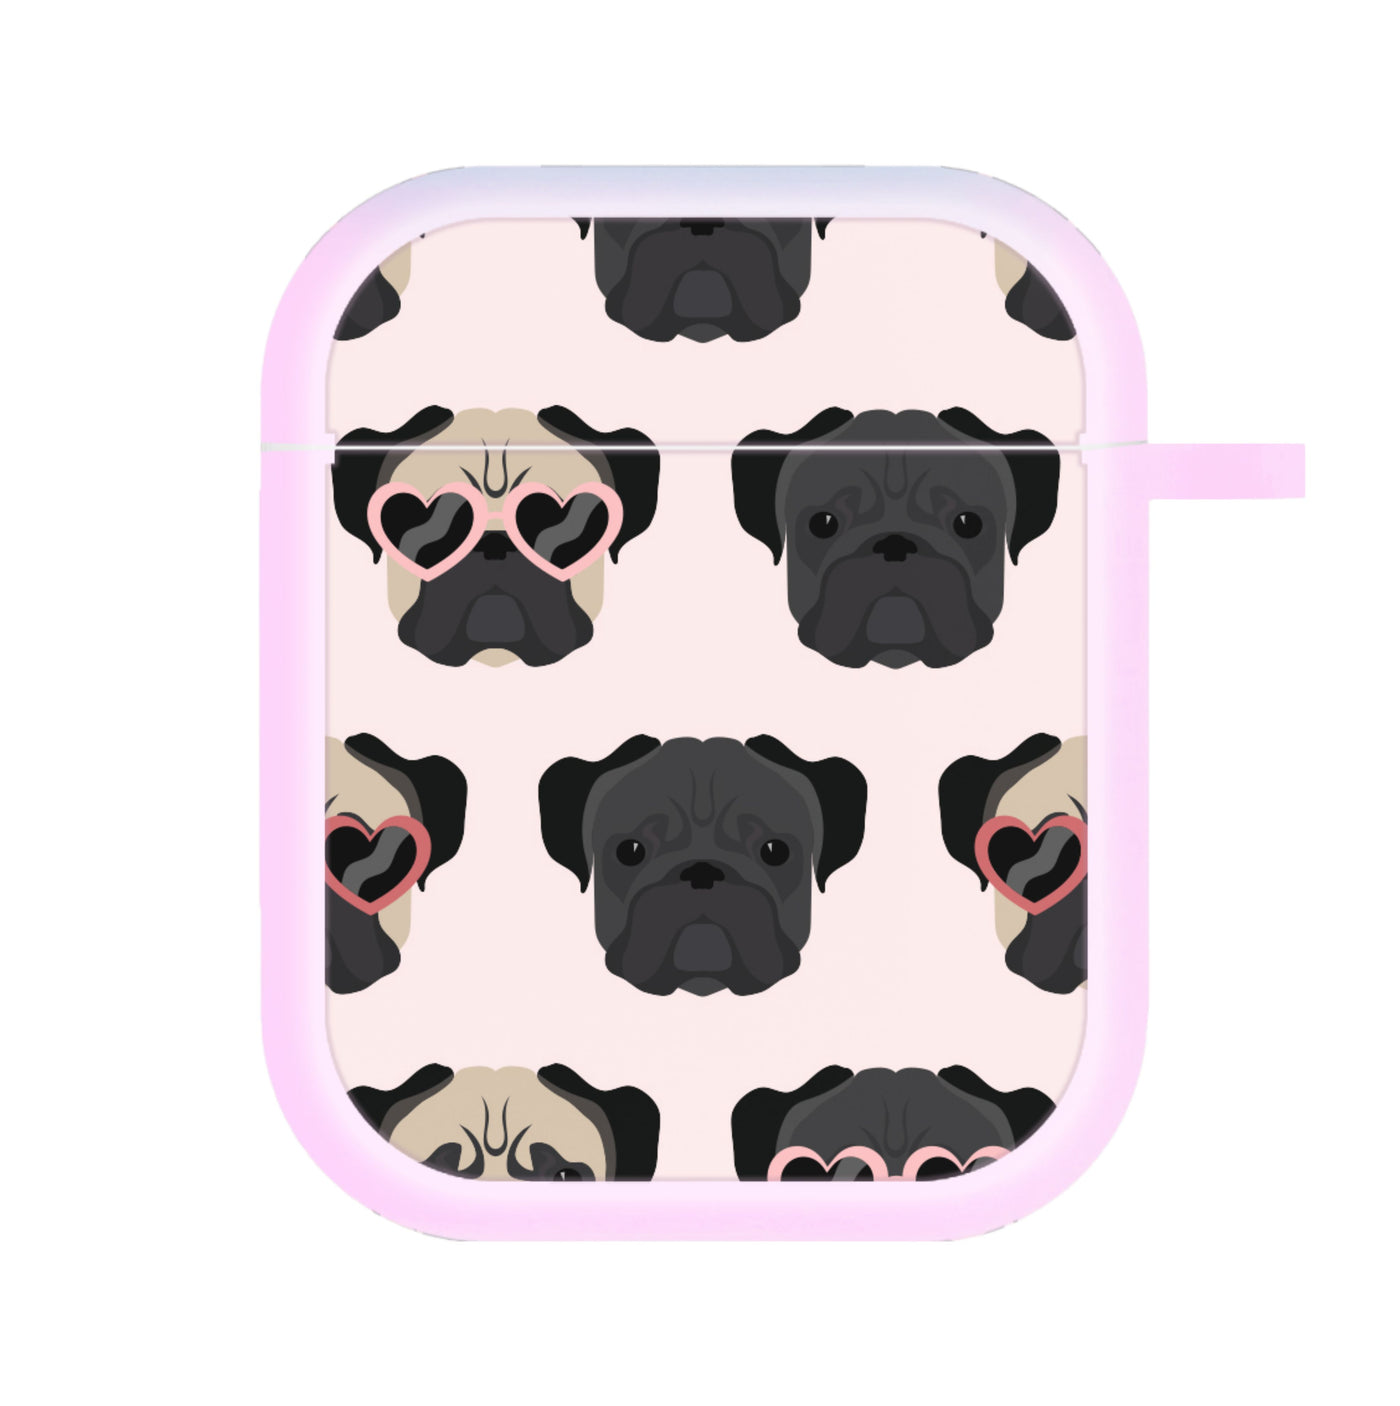 Sunny Pug Life - Dog Pattern AirPods Case